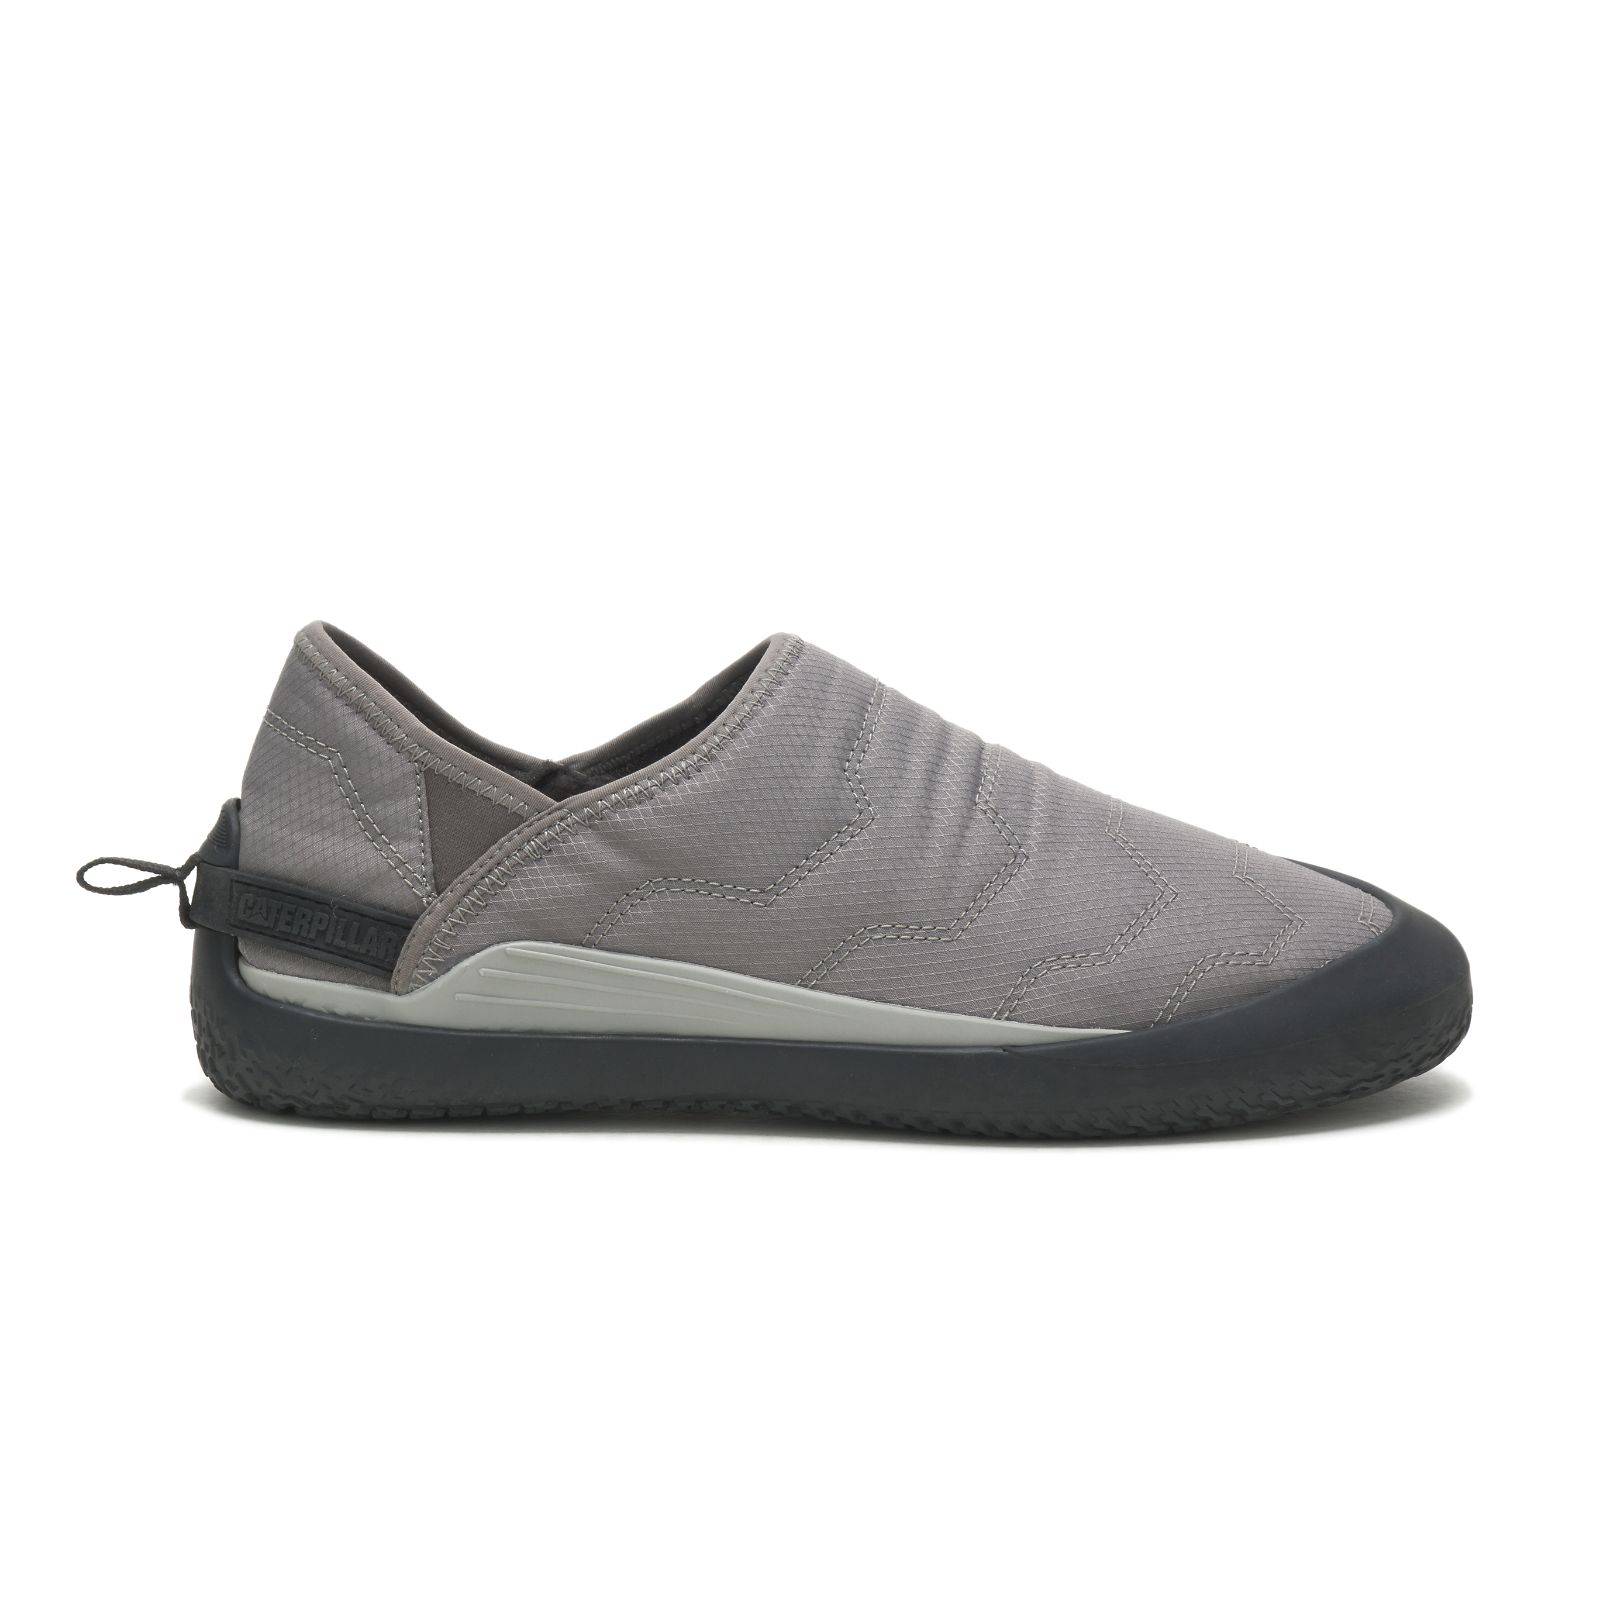 Caterpillar Shoes Islamabad - Caterpillar Crossover Womens Slip On Shoes Grey (650279-CWI)